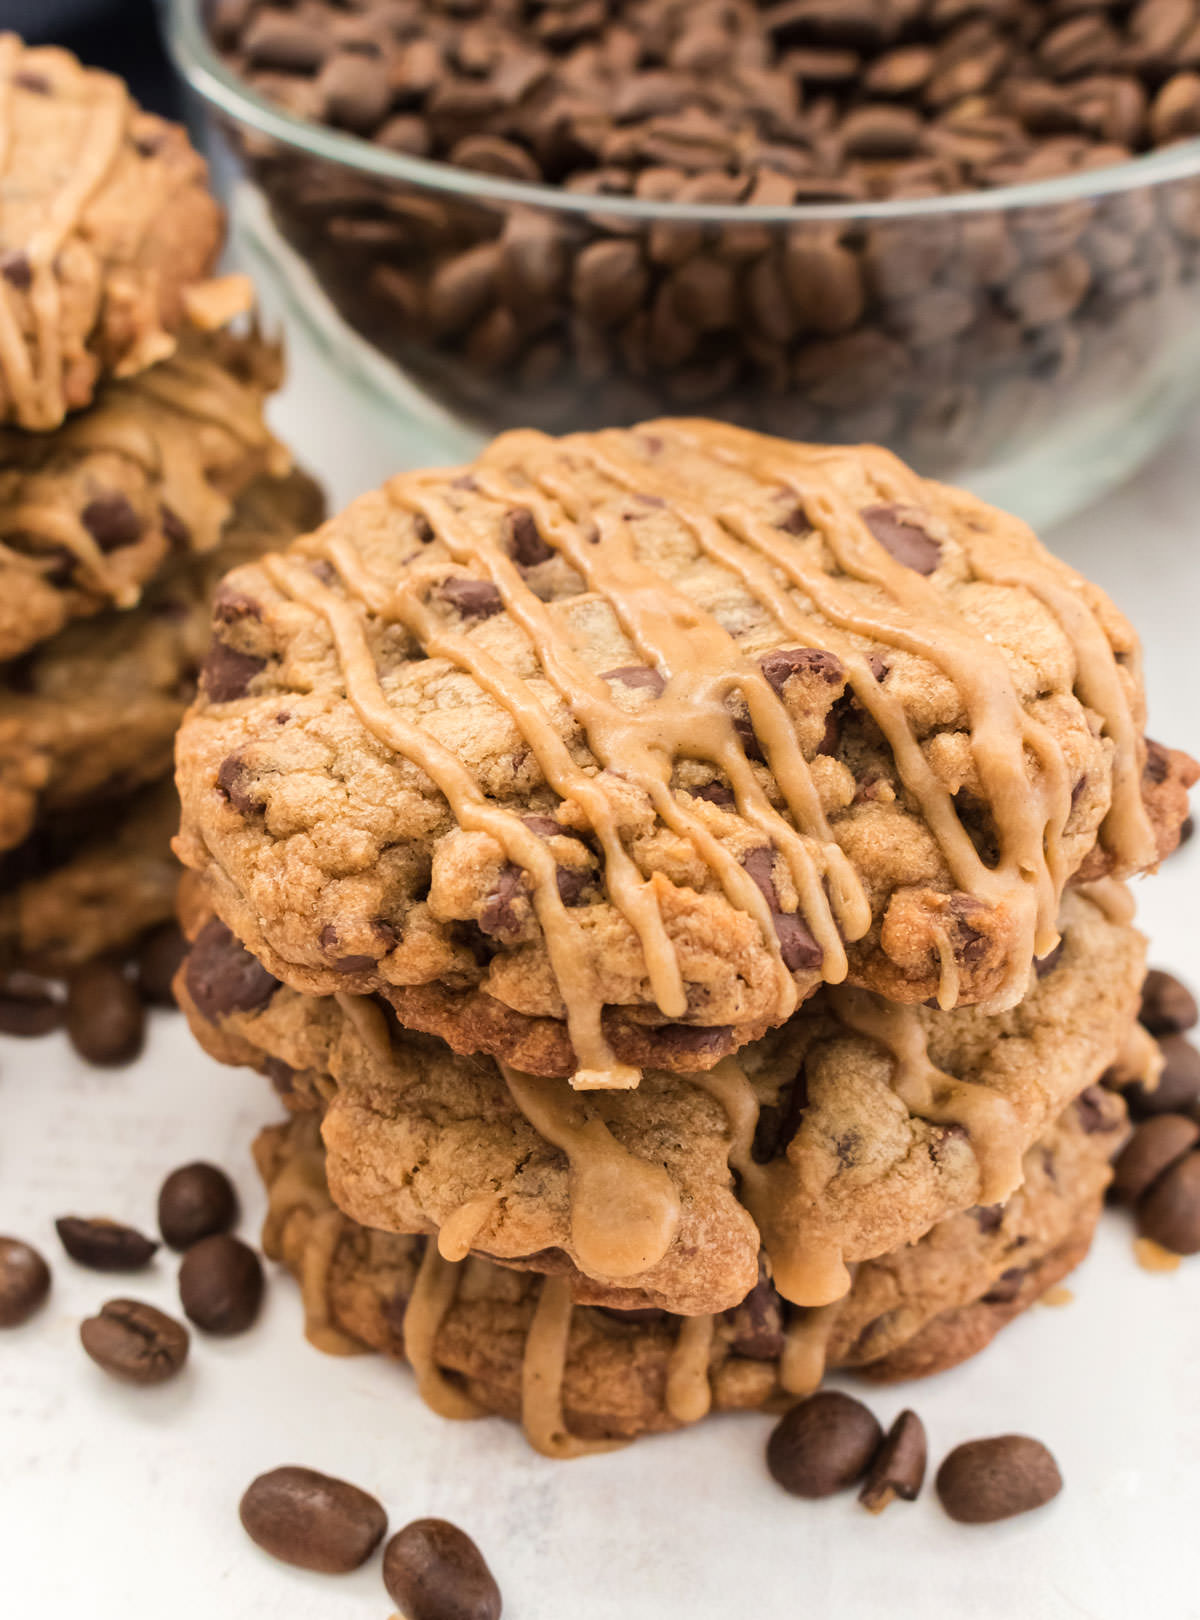 Closeup on a stack of three Coffee Chocolate Chip Cookies sitting on a white table surrounded by more cookies and a glass bowl filled with coffee beans.